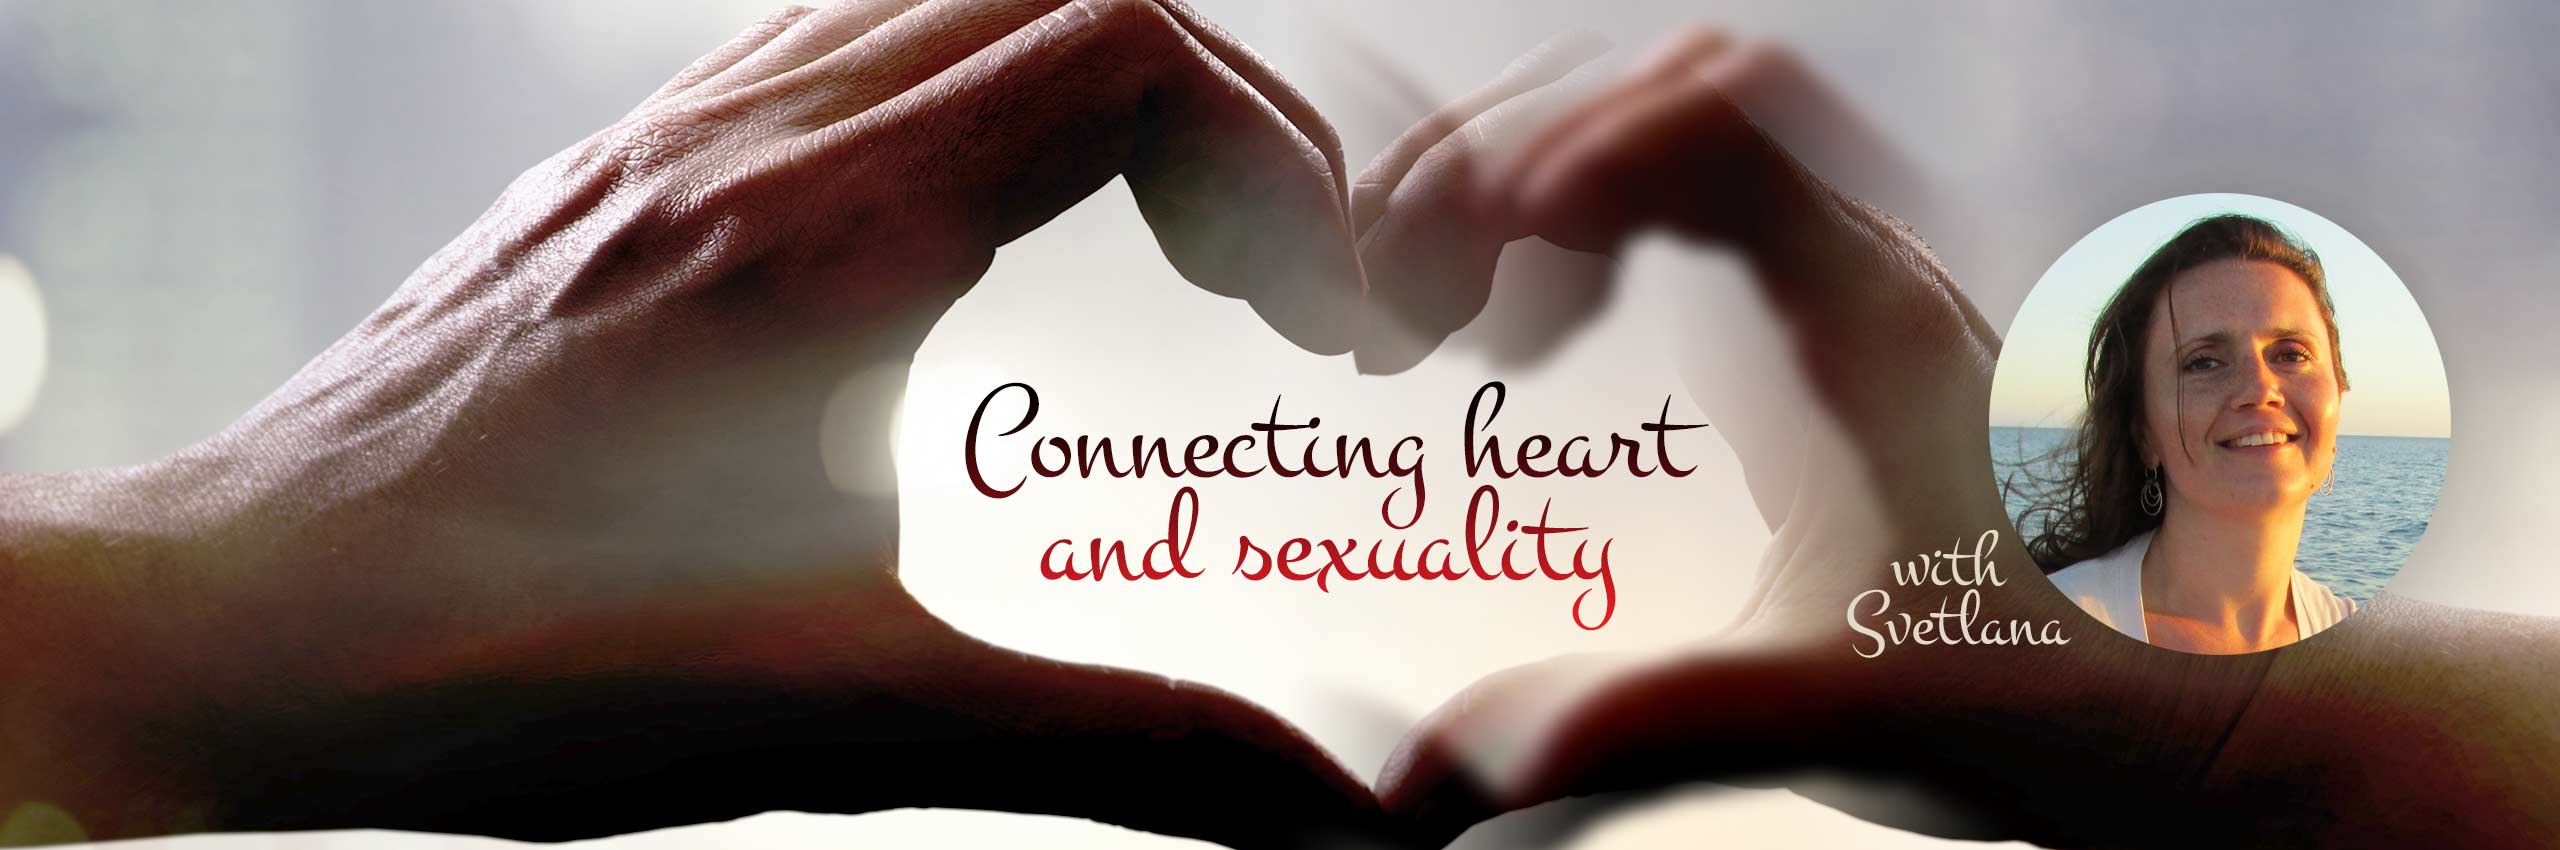 Connecting heart and sexuality